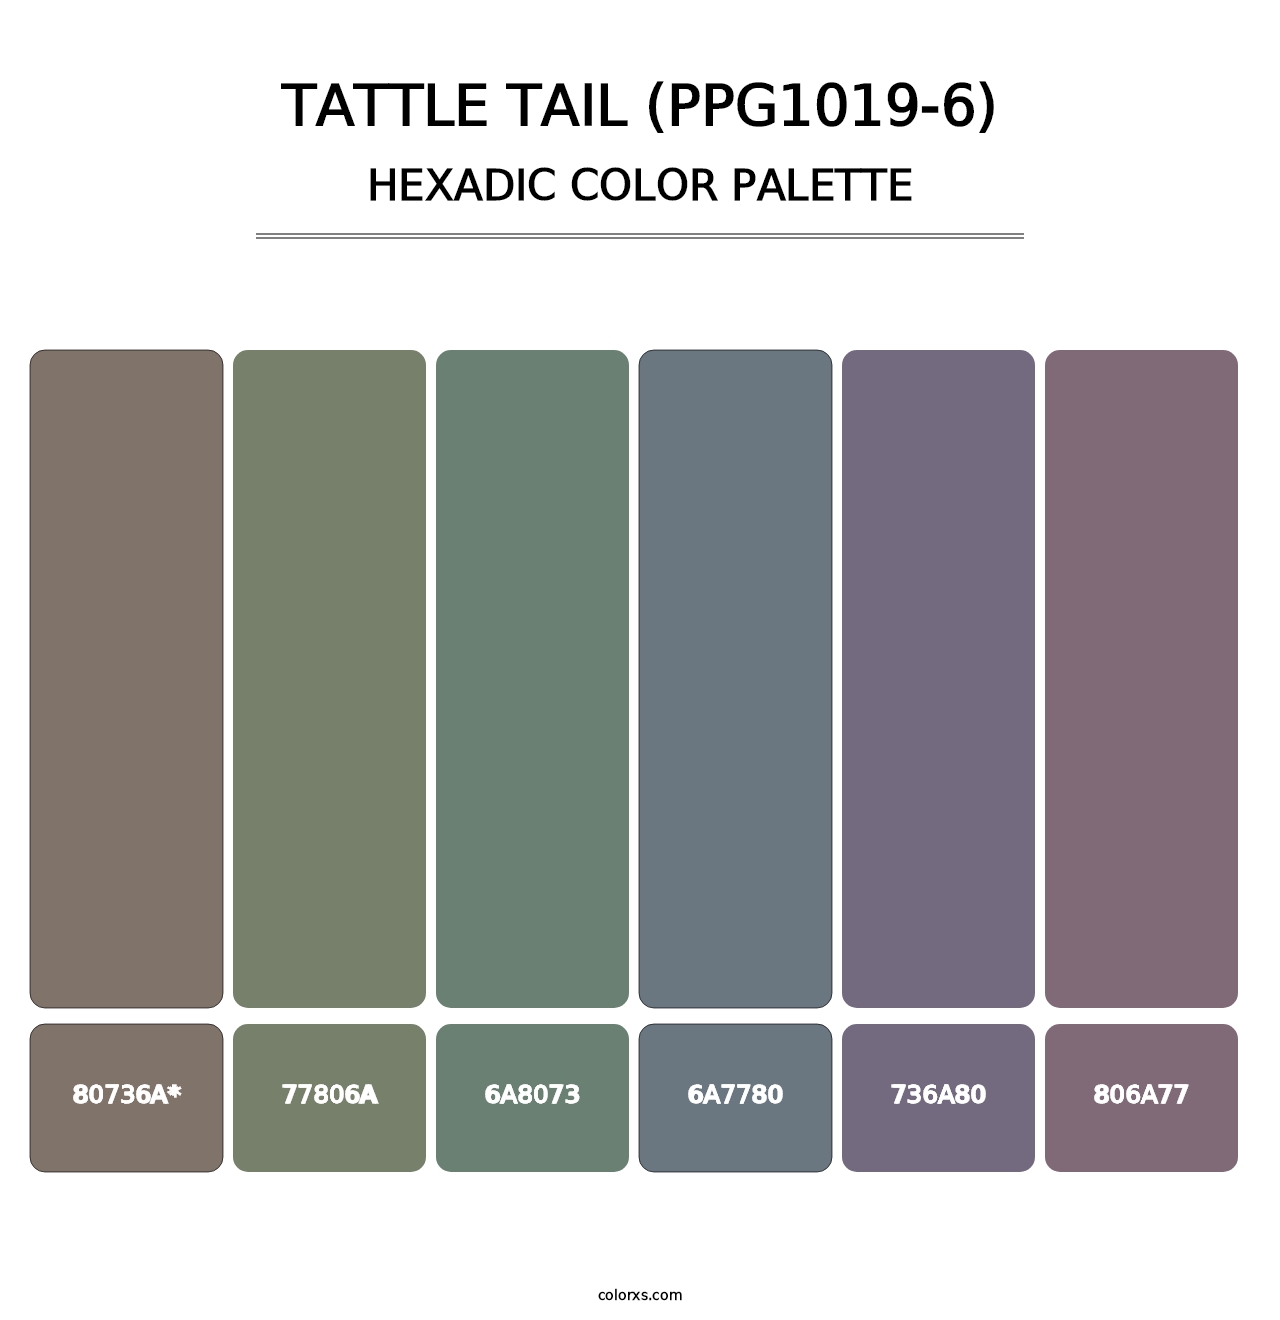 Tattle Tail (PPG1019-6) - Hexadic Color Palette